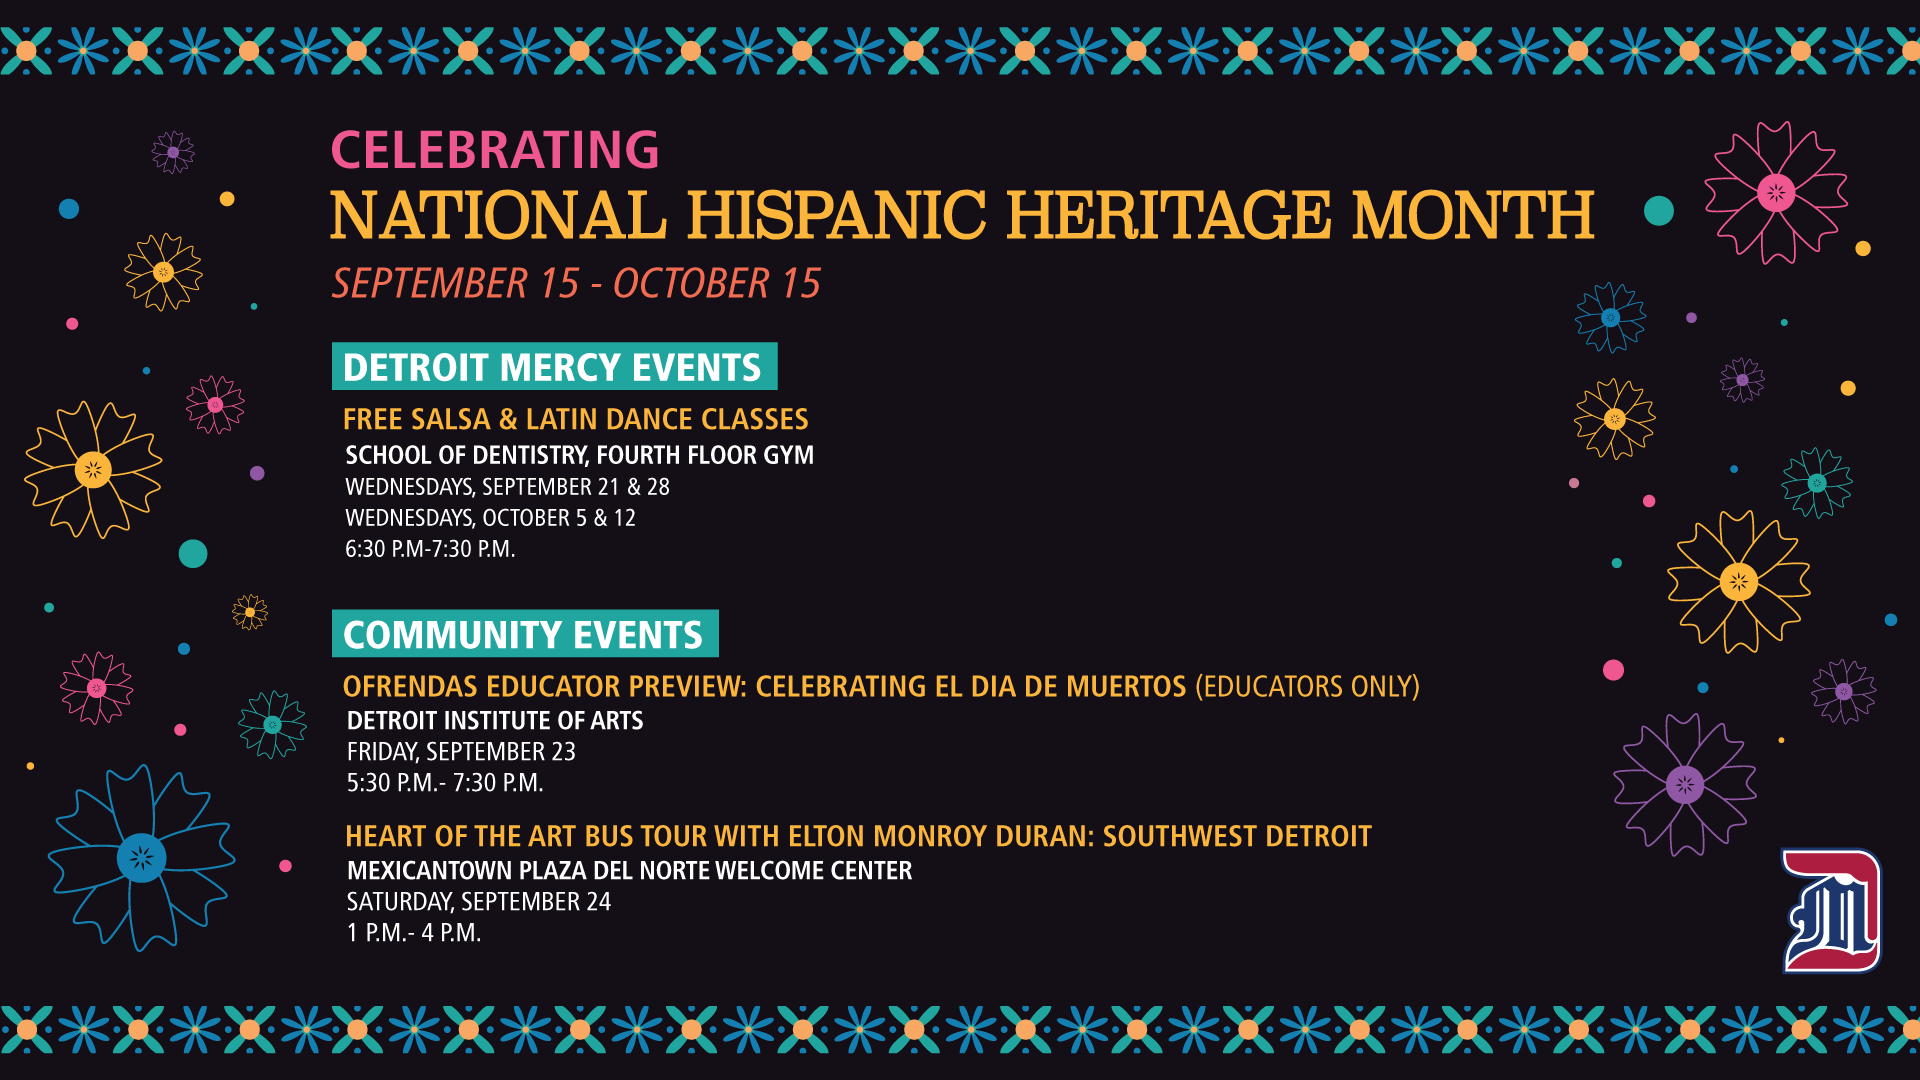 A graphic Celebrating National Hispanic Heritage Month, from September 15 through October 15. Text reads Detroit Mercy Events, Free Salsa and Latin Dance Classes, School of Dentistry Fourth Floor Gym, Wednesday, Sept. 21 and 28, Oct. 5 and 12, 6:30-7:30 p.m. Community events, Ofrendas Educator Preview: Celebrating El Dia de Muertos, Educators Only. Detroit Institute of Arts, Friday, Sept. 23, 5:30-7:30 p.m. Heart of the Art Bus Tour with Elton Monroy: Southwest Detroit, Mexicantown Plaza del Norte Welcome Center, Saturday, Sept. 24, 1-4 p.m.